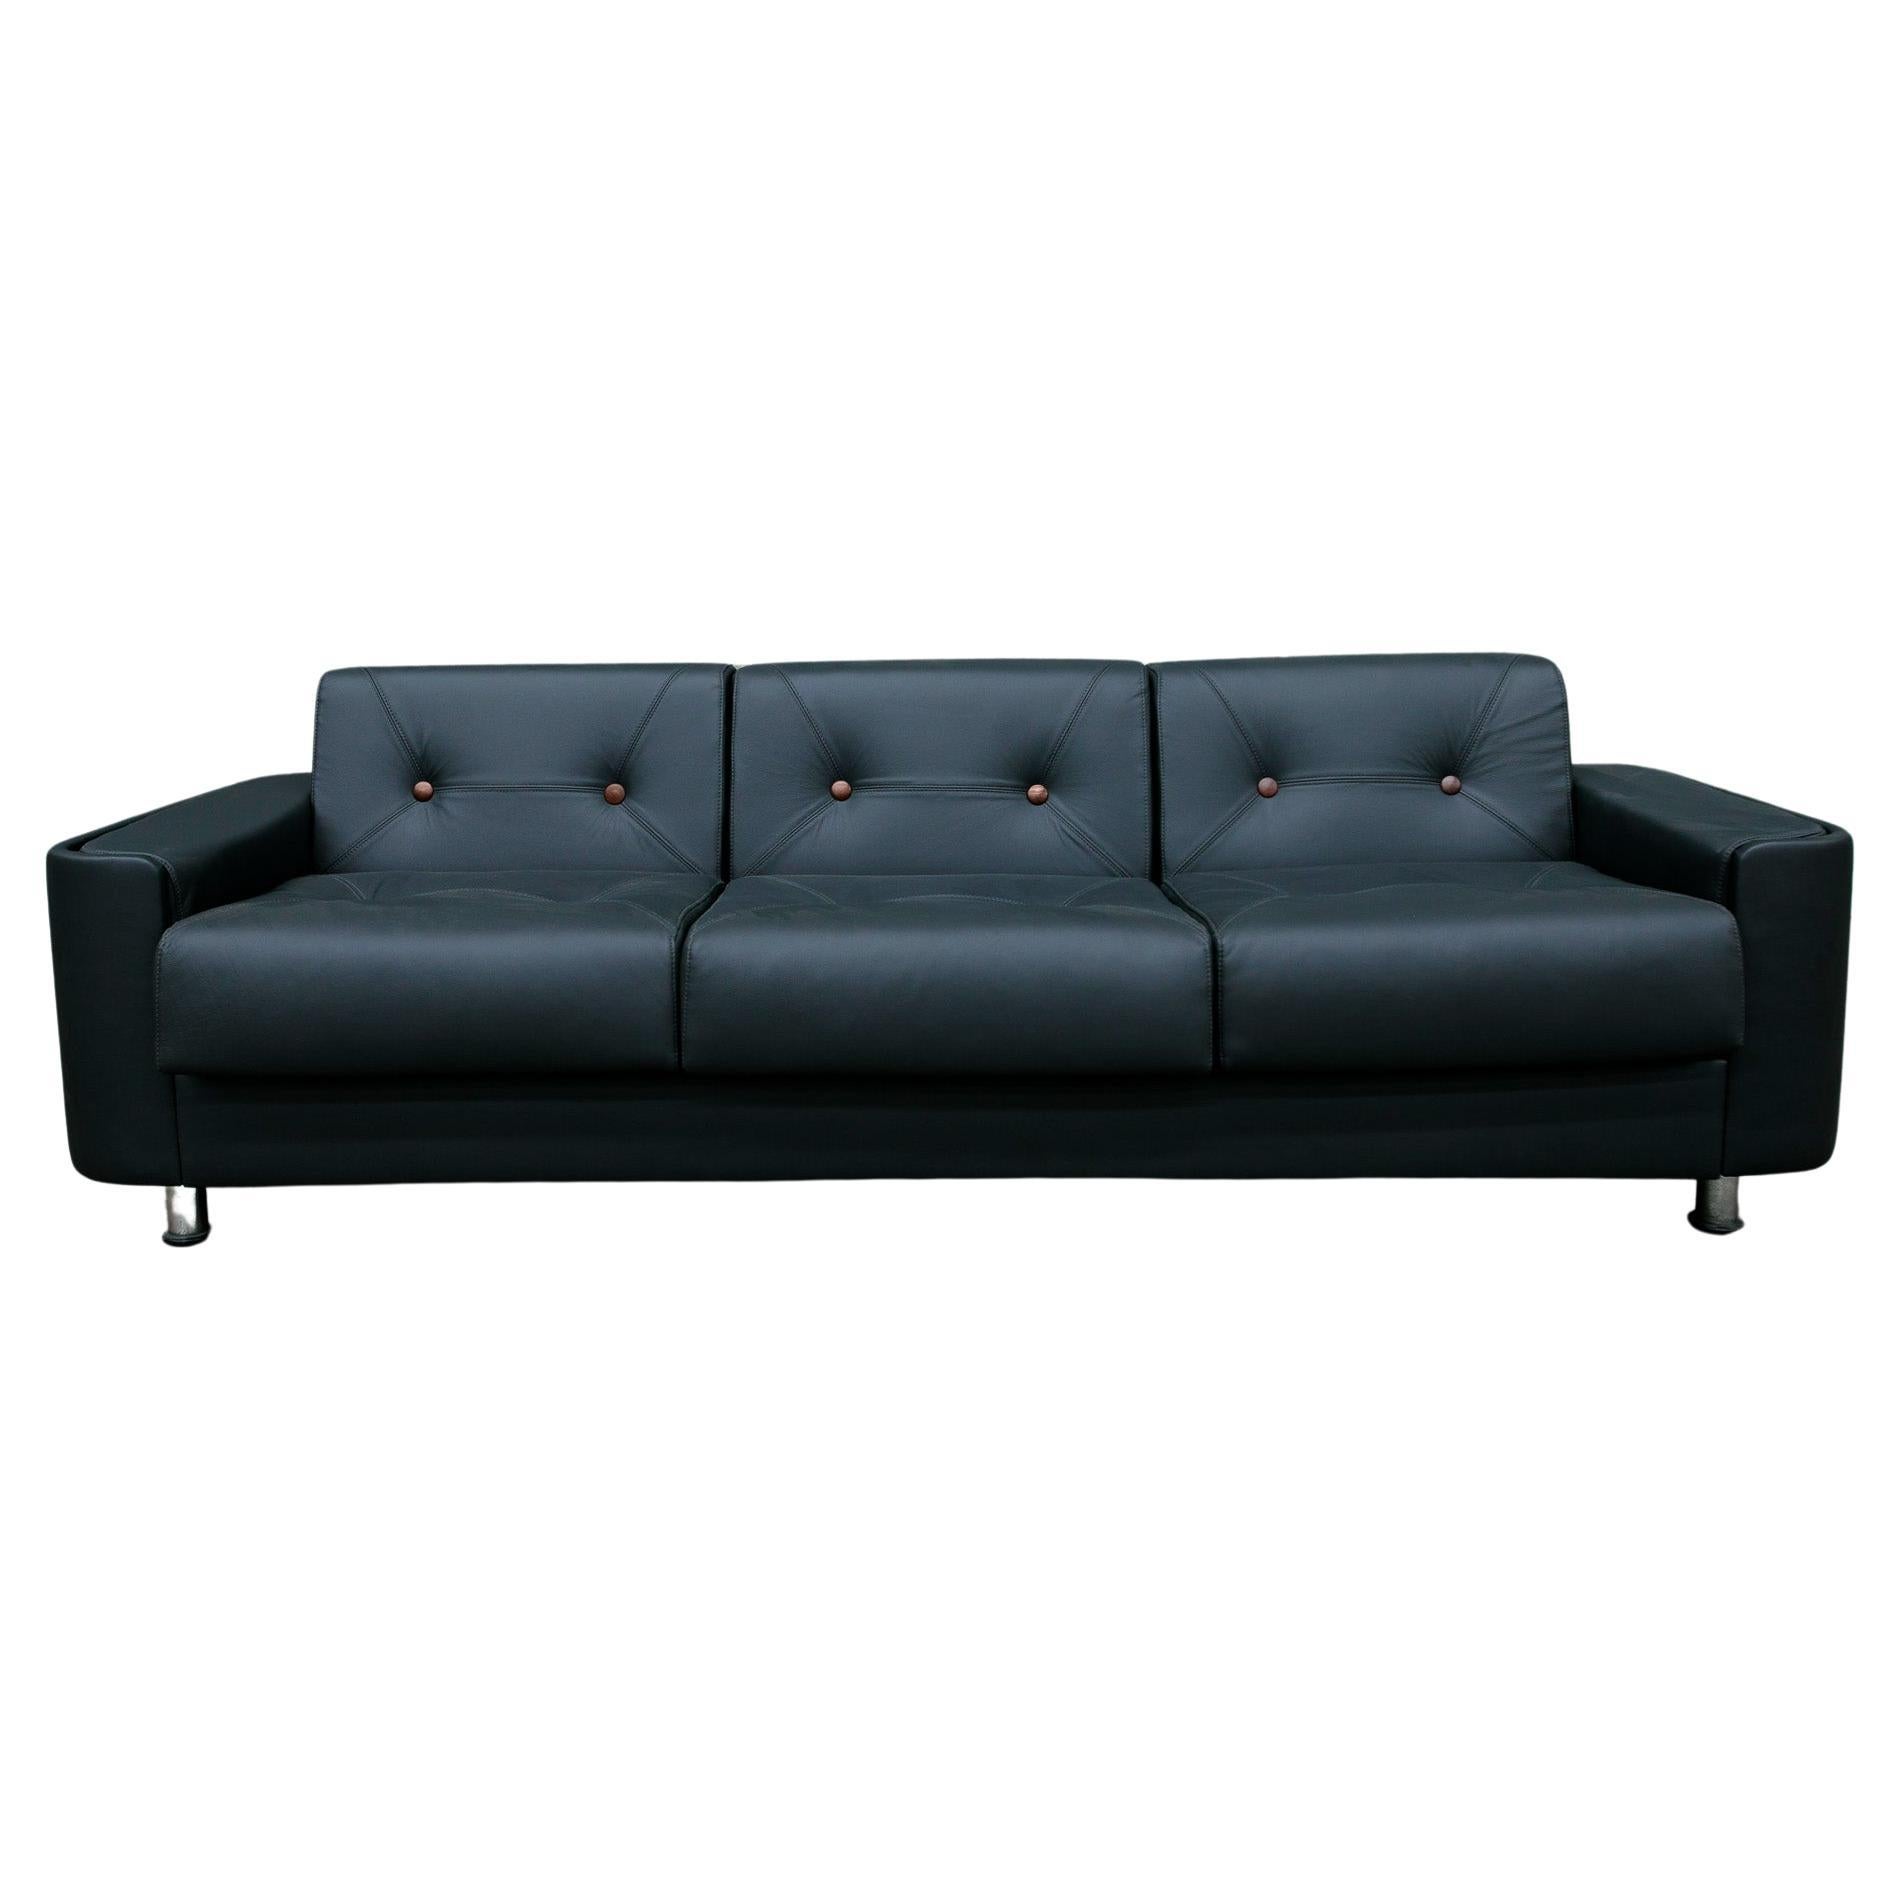 Available now, this very Brazilian Modern sofa in black leather, wood and Chrome designed by Jorge Zalszupin in the seventies is simply spectacular!

This one-of-a-kind three seat sofa is called “Pullman” and features a solid wood structure